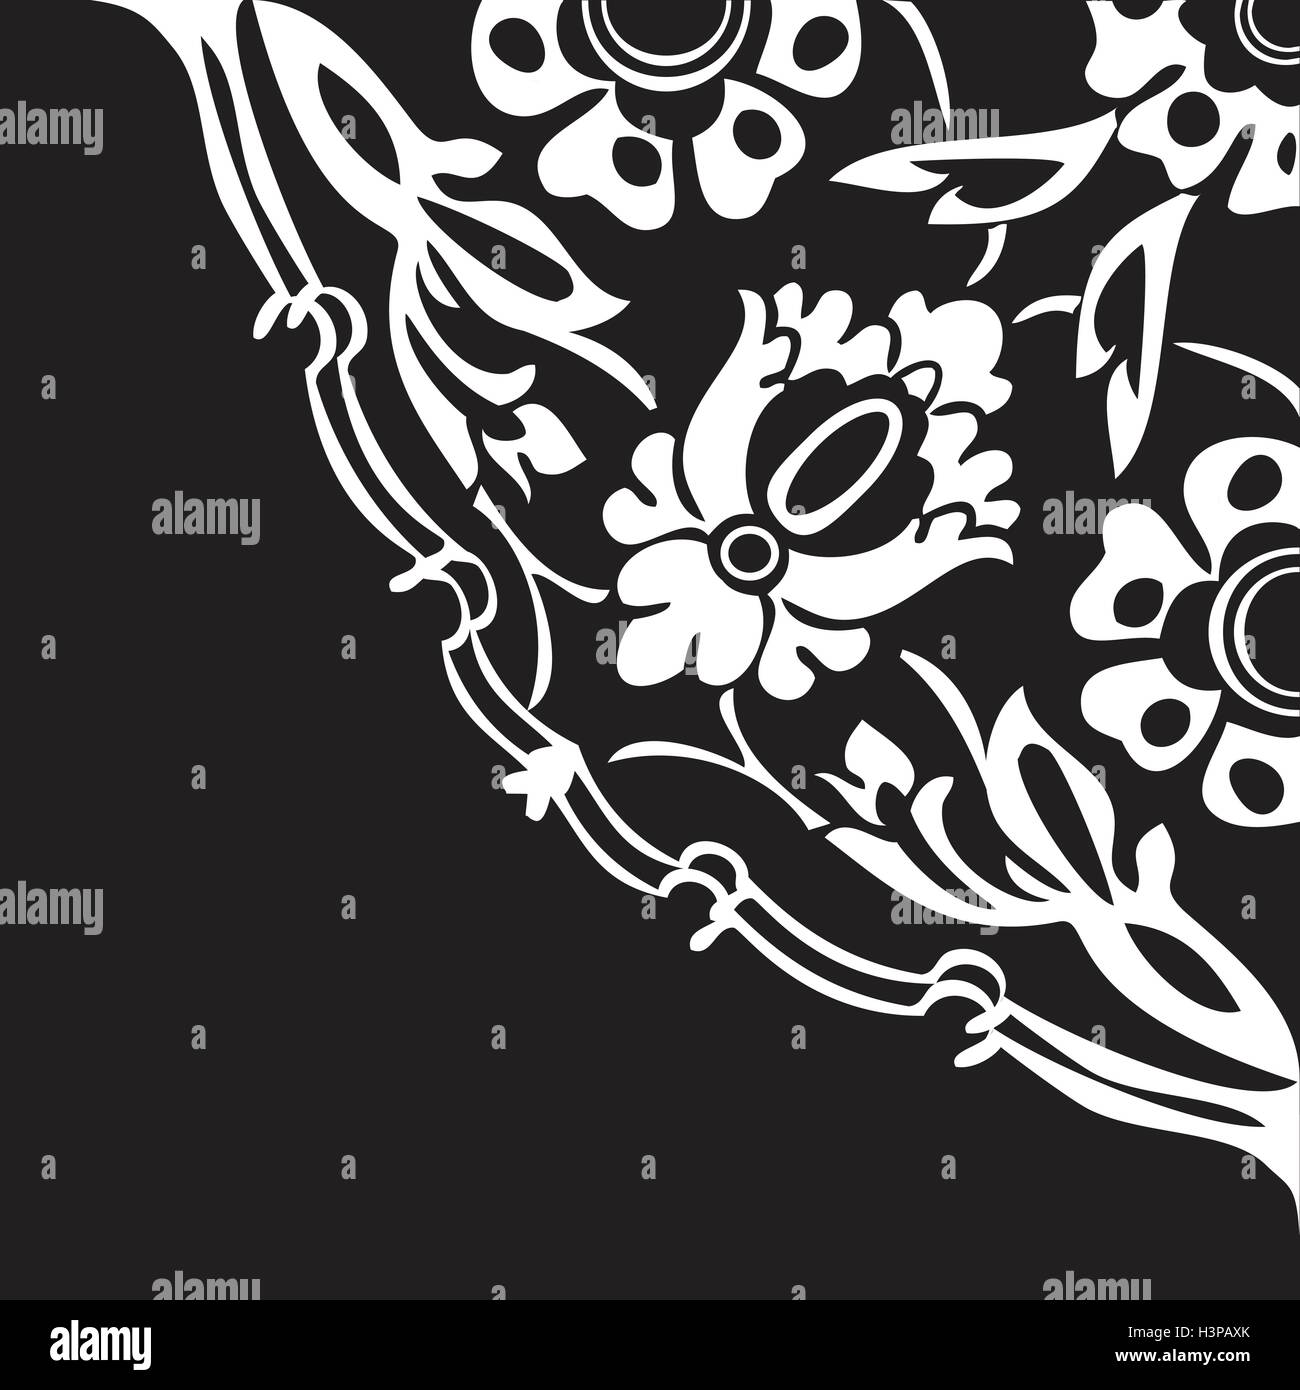 Black And White Round Floral Border Corner Abstract Background Vector Stock Vector Image Art Alamy,Logo Basketball Shirt Designs